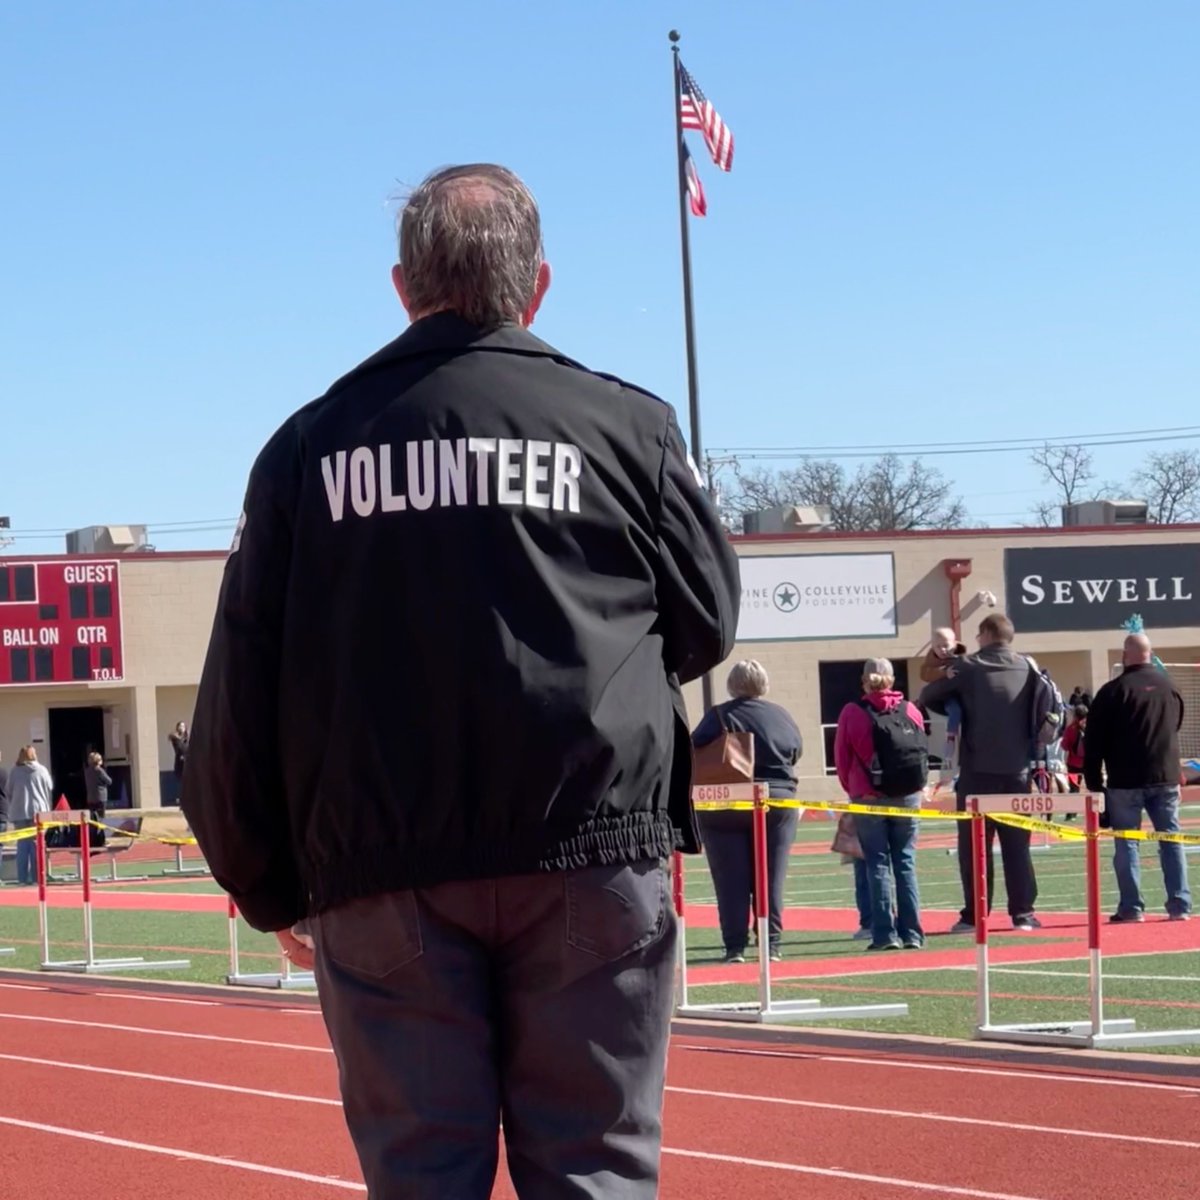 Today we commend our police volunteers who help at Special Olympics events, city festivals and outside agency and school district trainings. They build structures, distribute merchandise, or oversee portions of the event for its overall success. #NationalVolunteerWeek